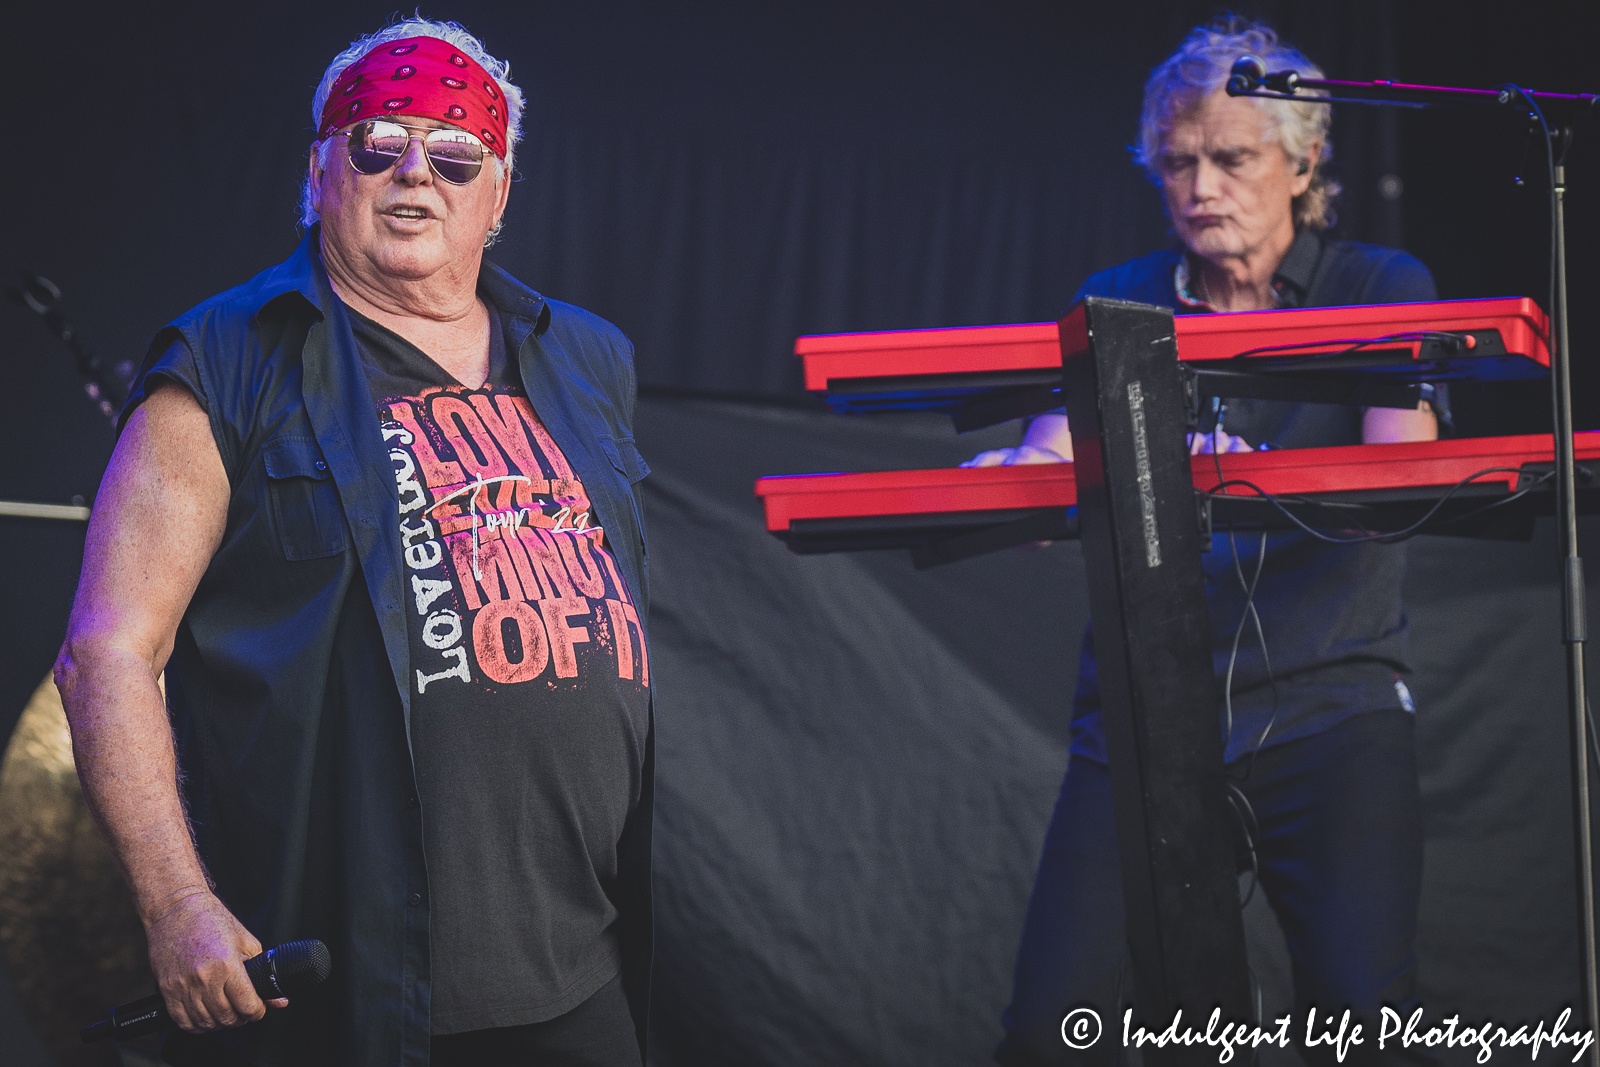 Loverboy lead singer Mike Reno and keyboardist Doug Johnson performing together at Starlight Theatre in Kansas City, MO on July 18, 2023.